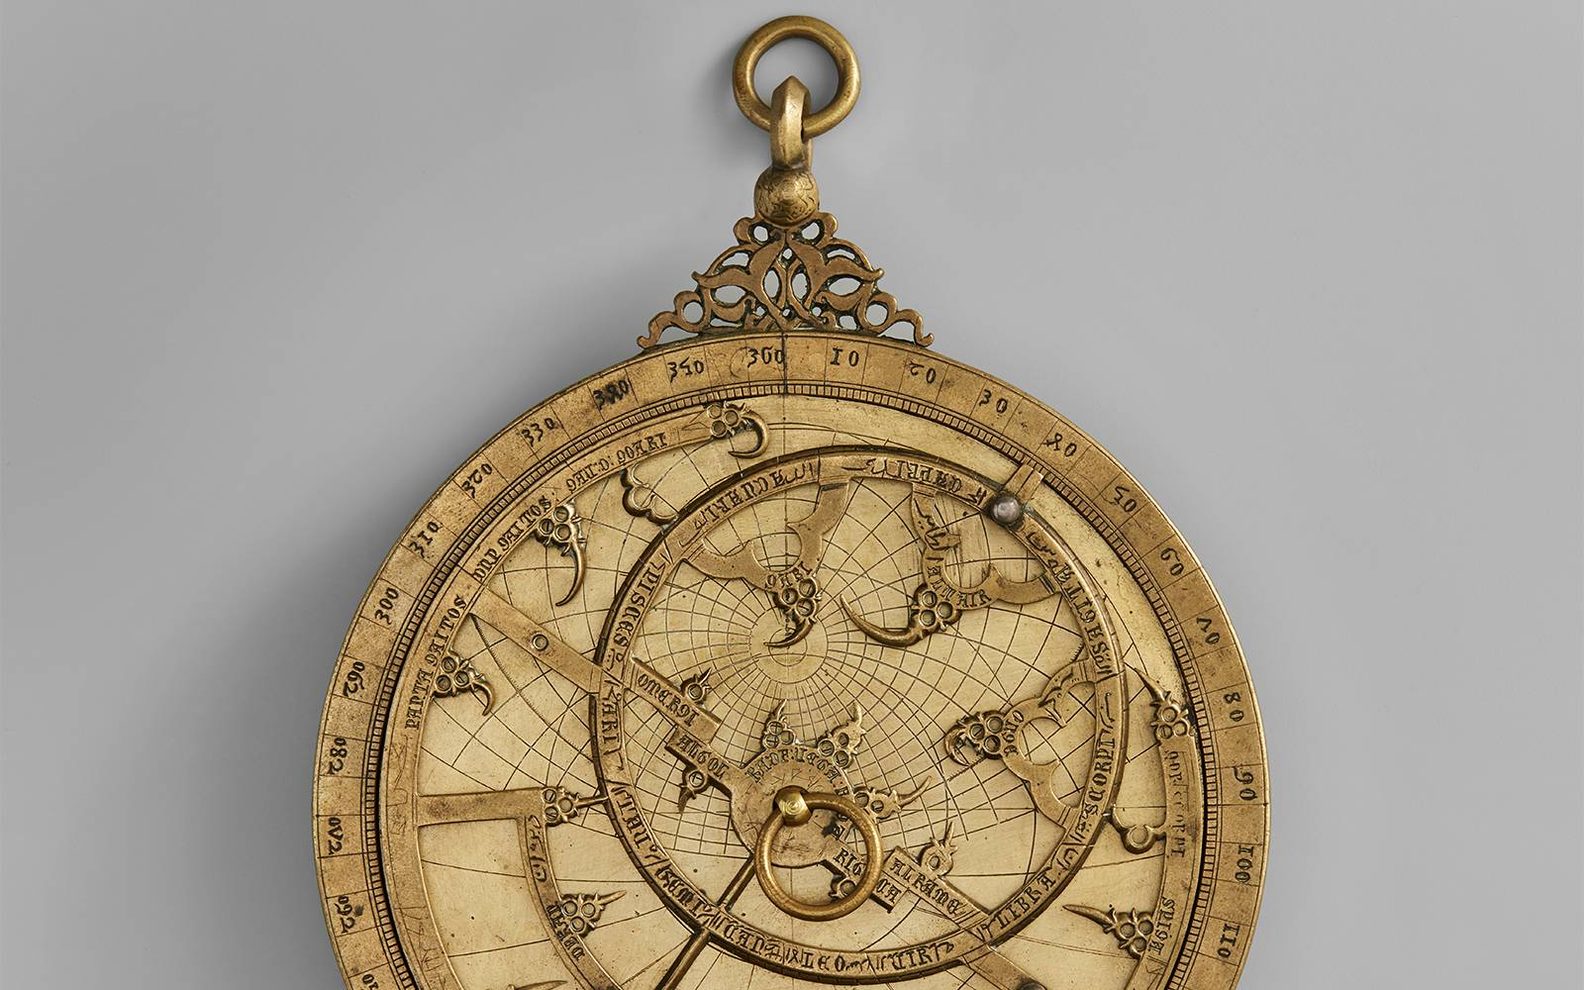 Details of the AstroLabe, an artifact in the permanent collection at the Aga Khan Museum